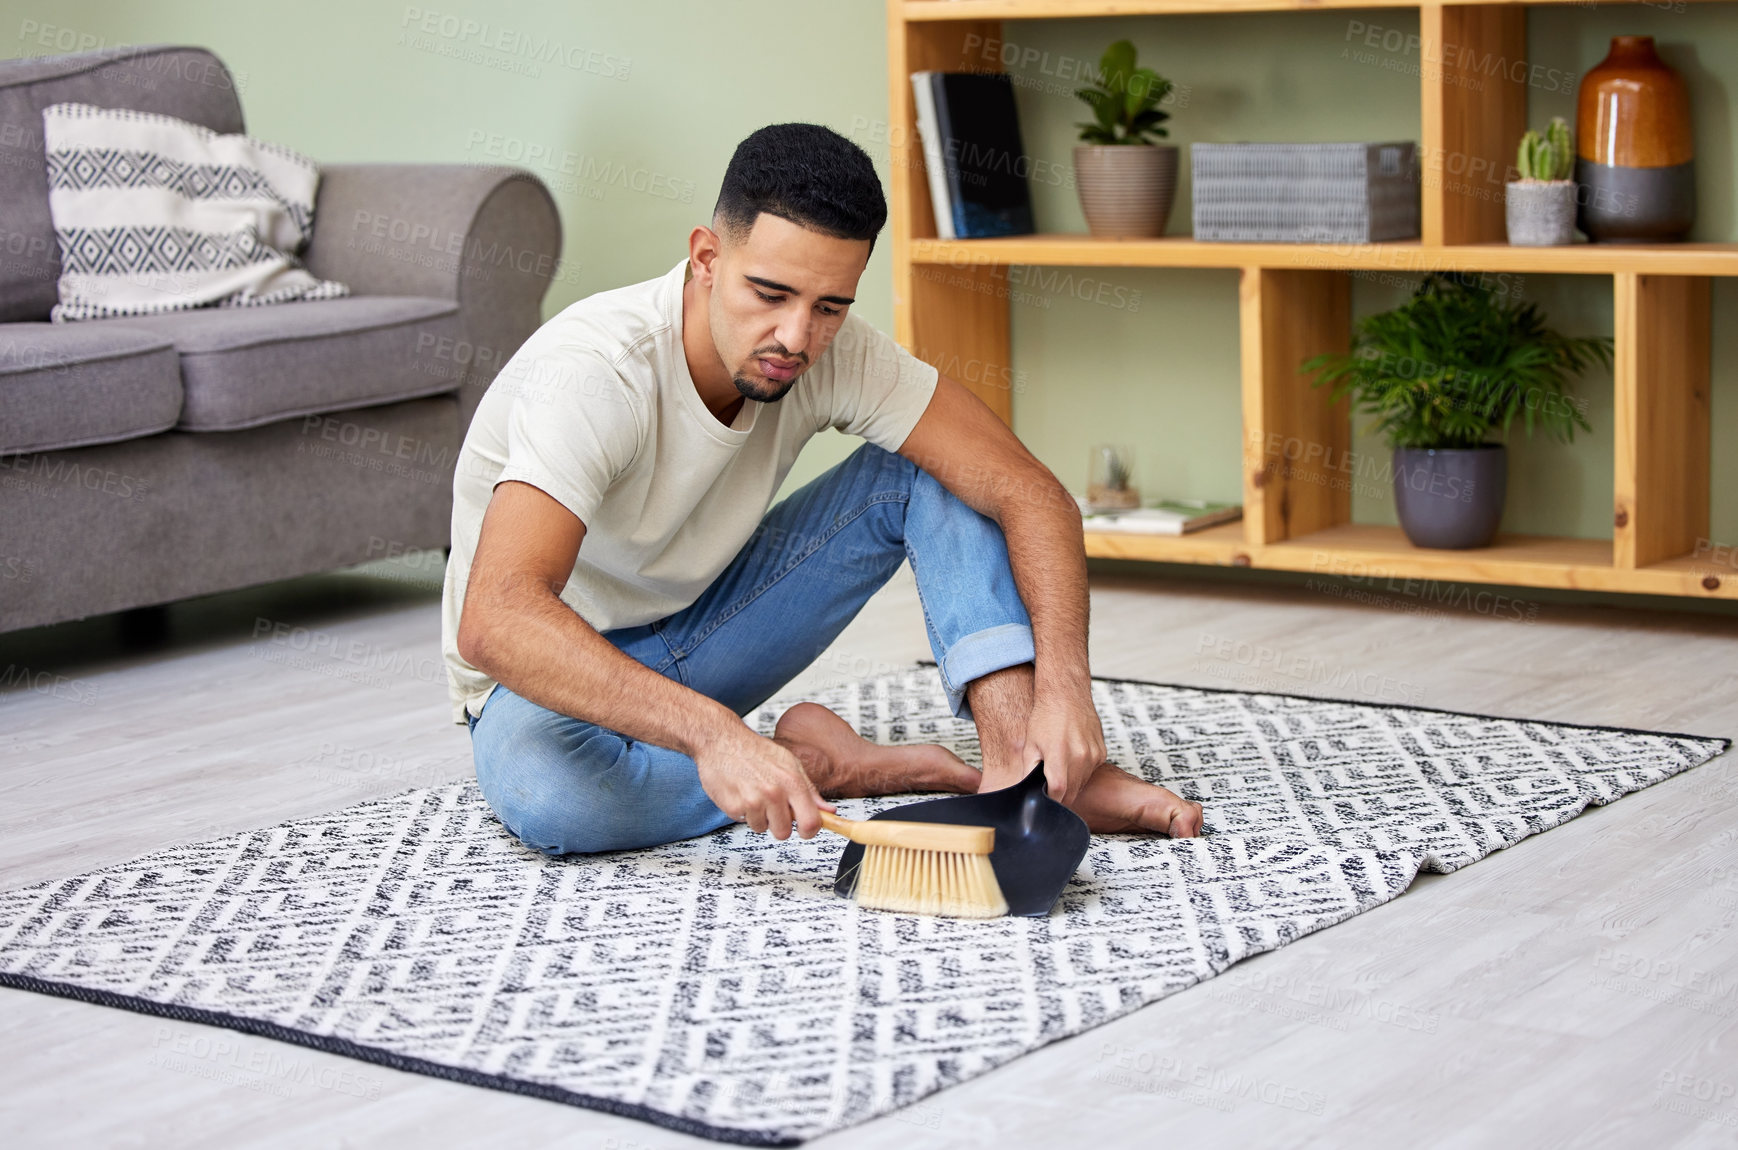 Buy stock photo Tired, man and cleaning floor with dustpan and brush for chores, housework and healthy routine. Serious, male person and sweeping ground of dust and germs for hygiene and safety of apartment or home